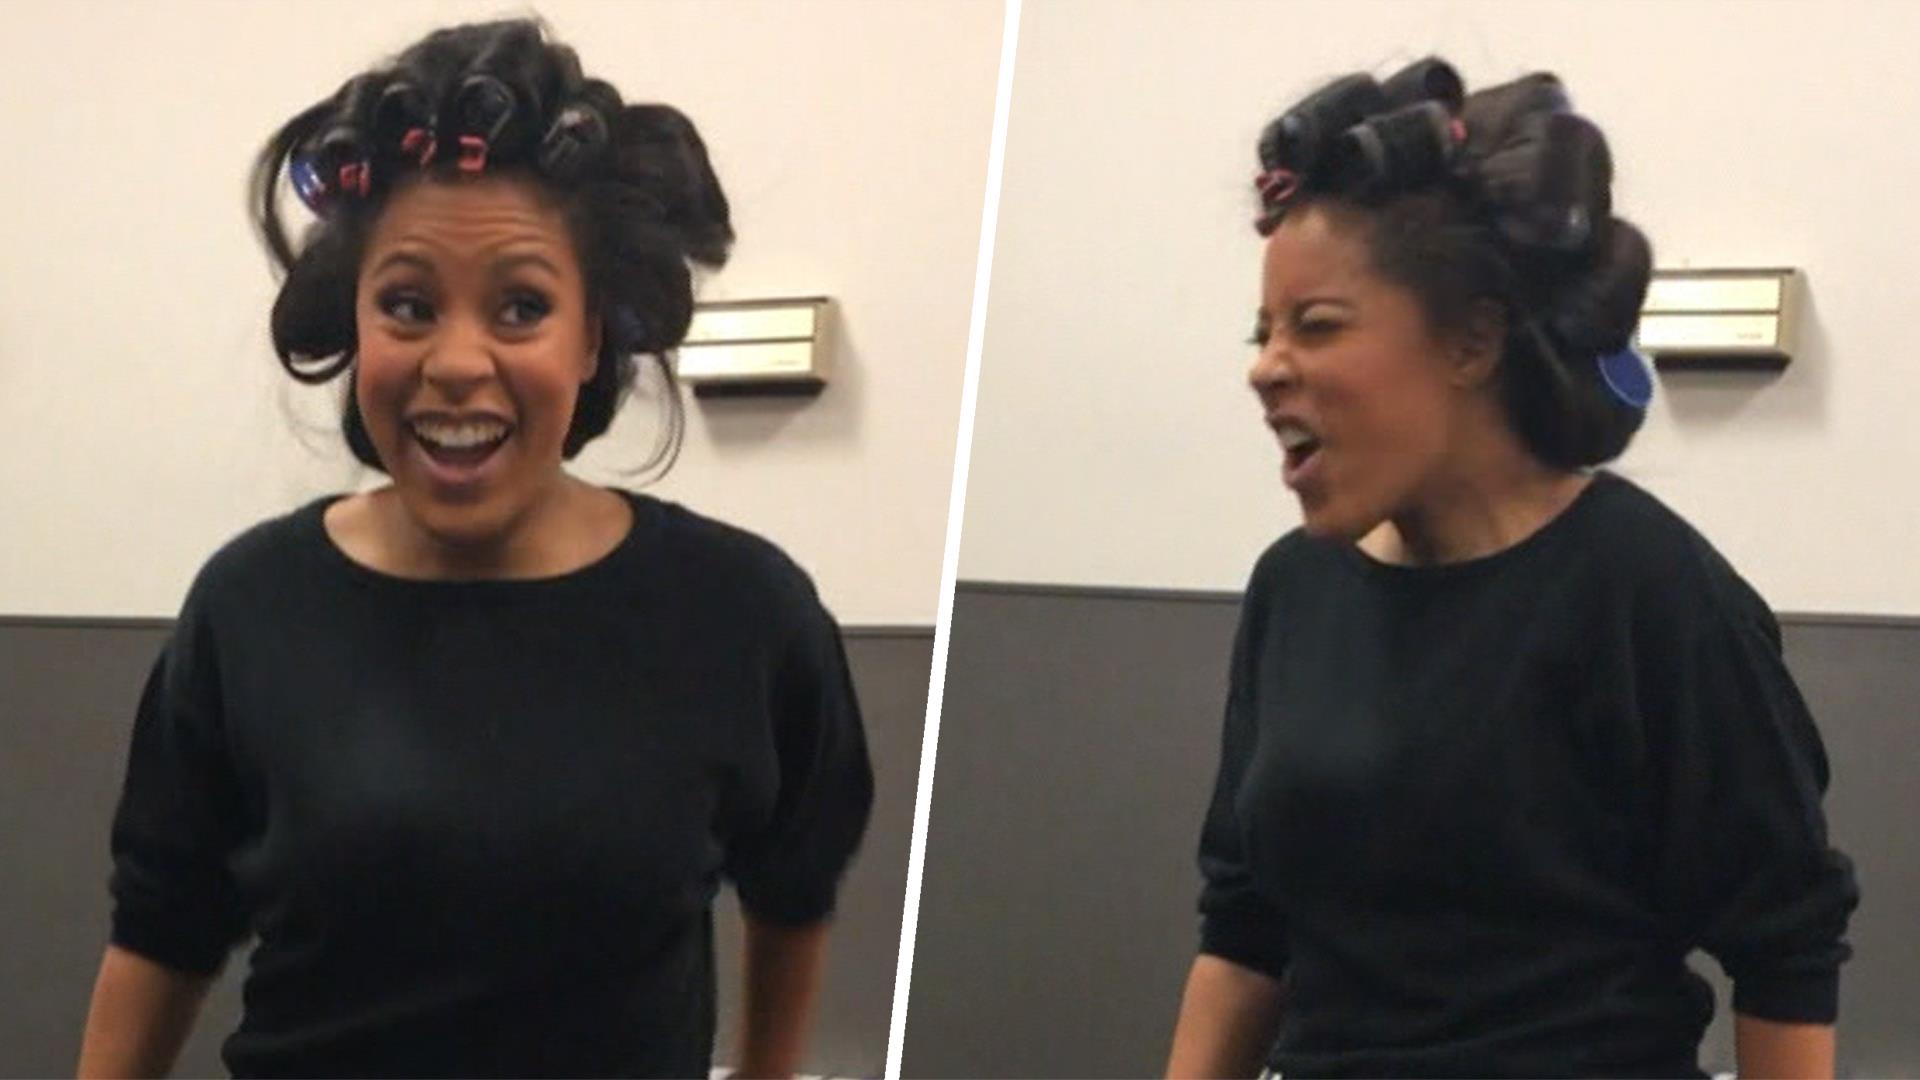 Watch Sheinelle Jones bust her Beyonce-inspired moves!